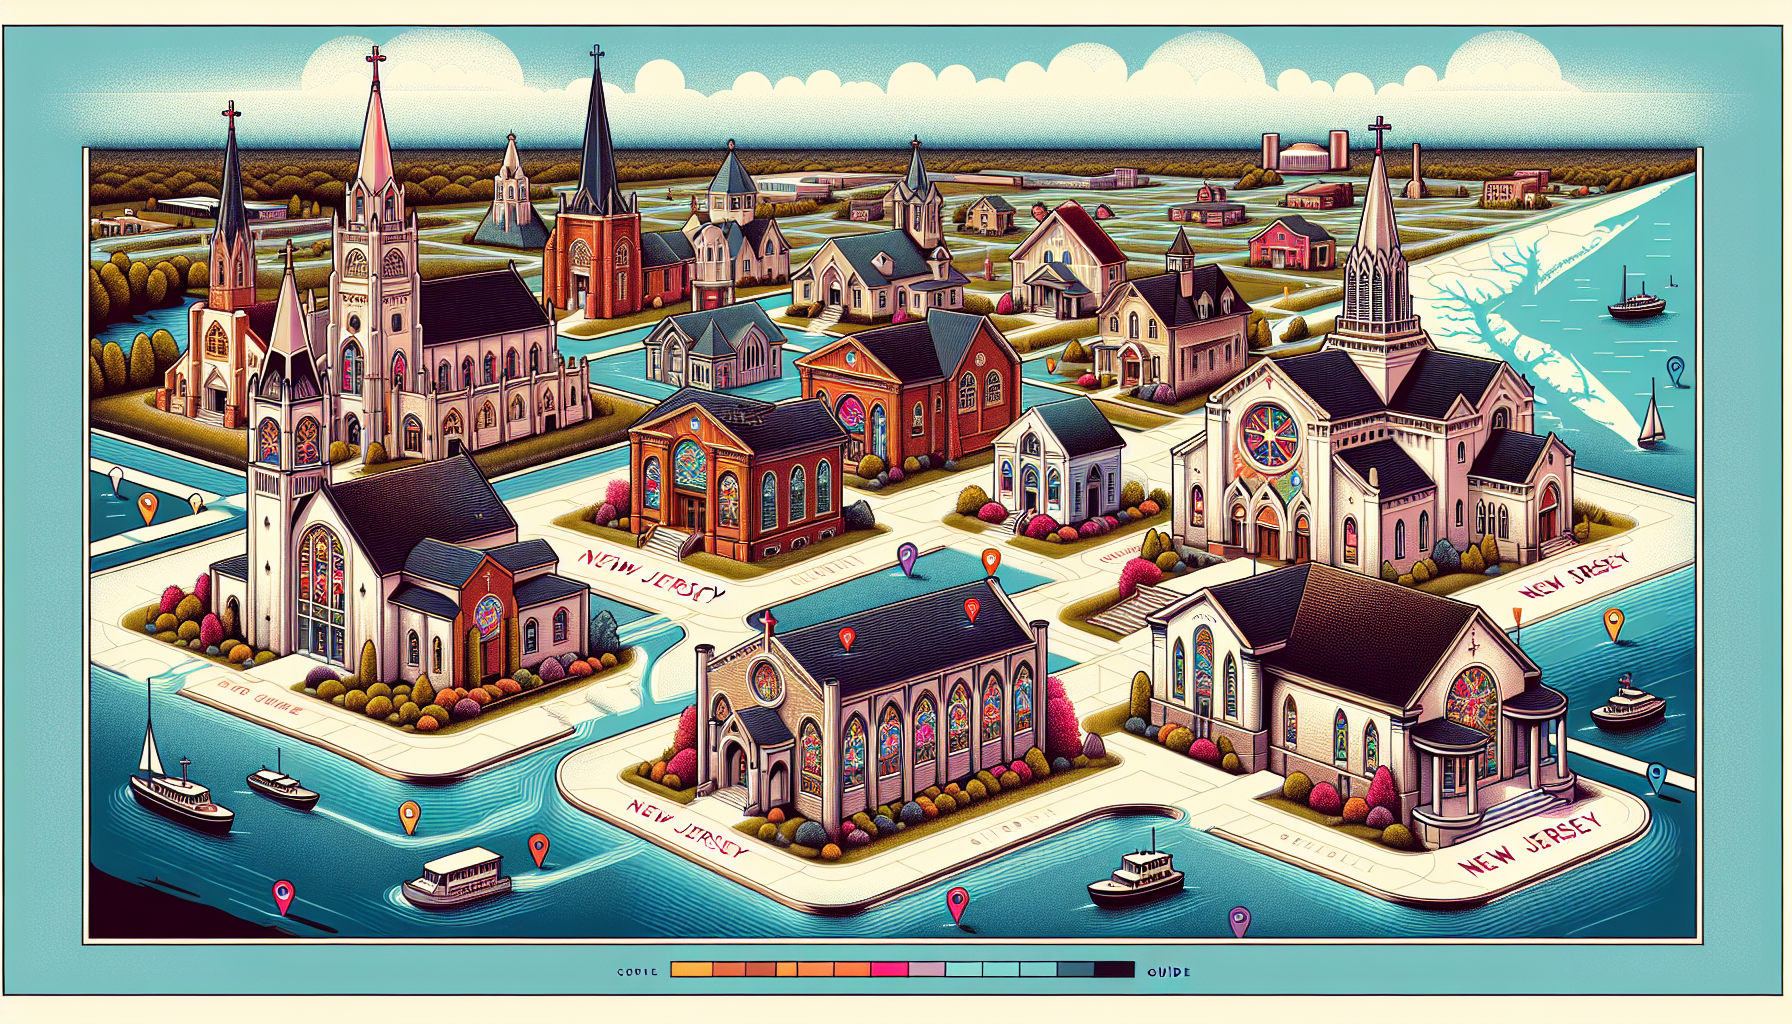 A detailed, vibrant illustration of various Christian churches in New Jersey, showcasing diverse architectural styles and cultural influences, with a bright, welcoming atmosphere. Include a map of New